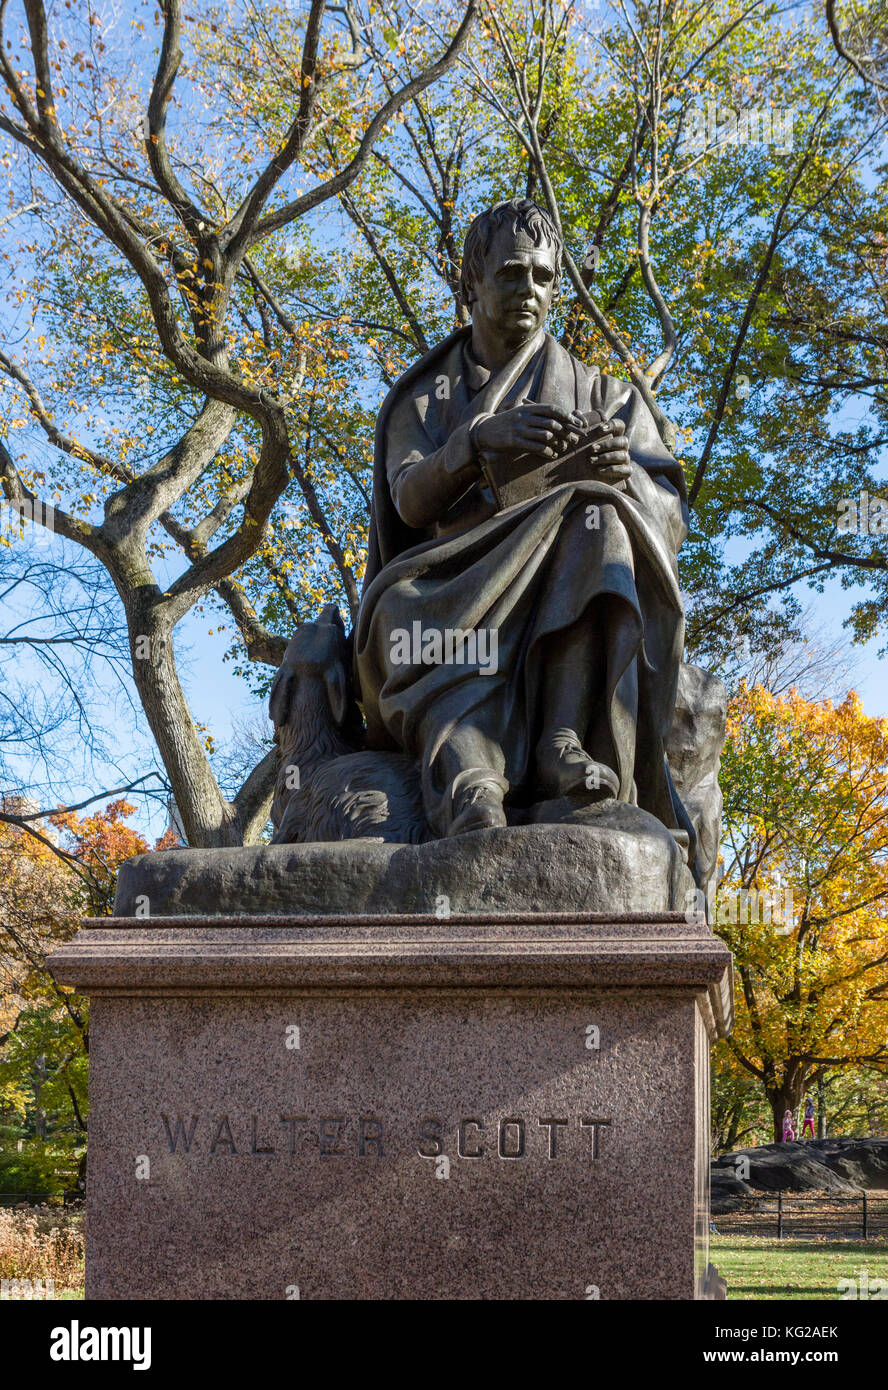 Statue of the Scottish writer Sir Walter Scott on The Mall, Central Park, New York City, NY, USA Stock Photo